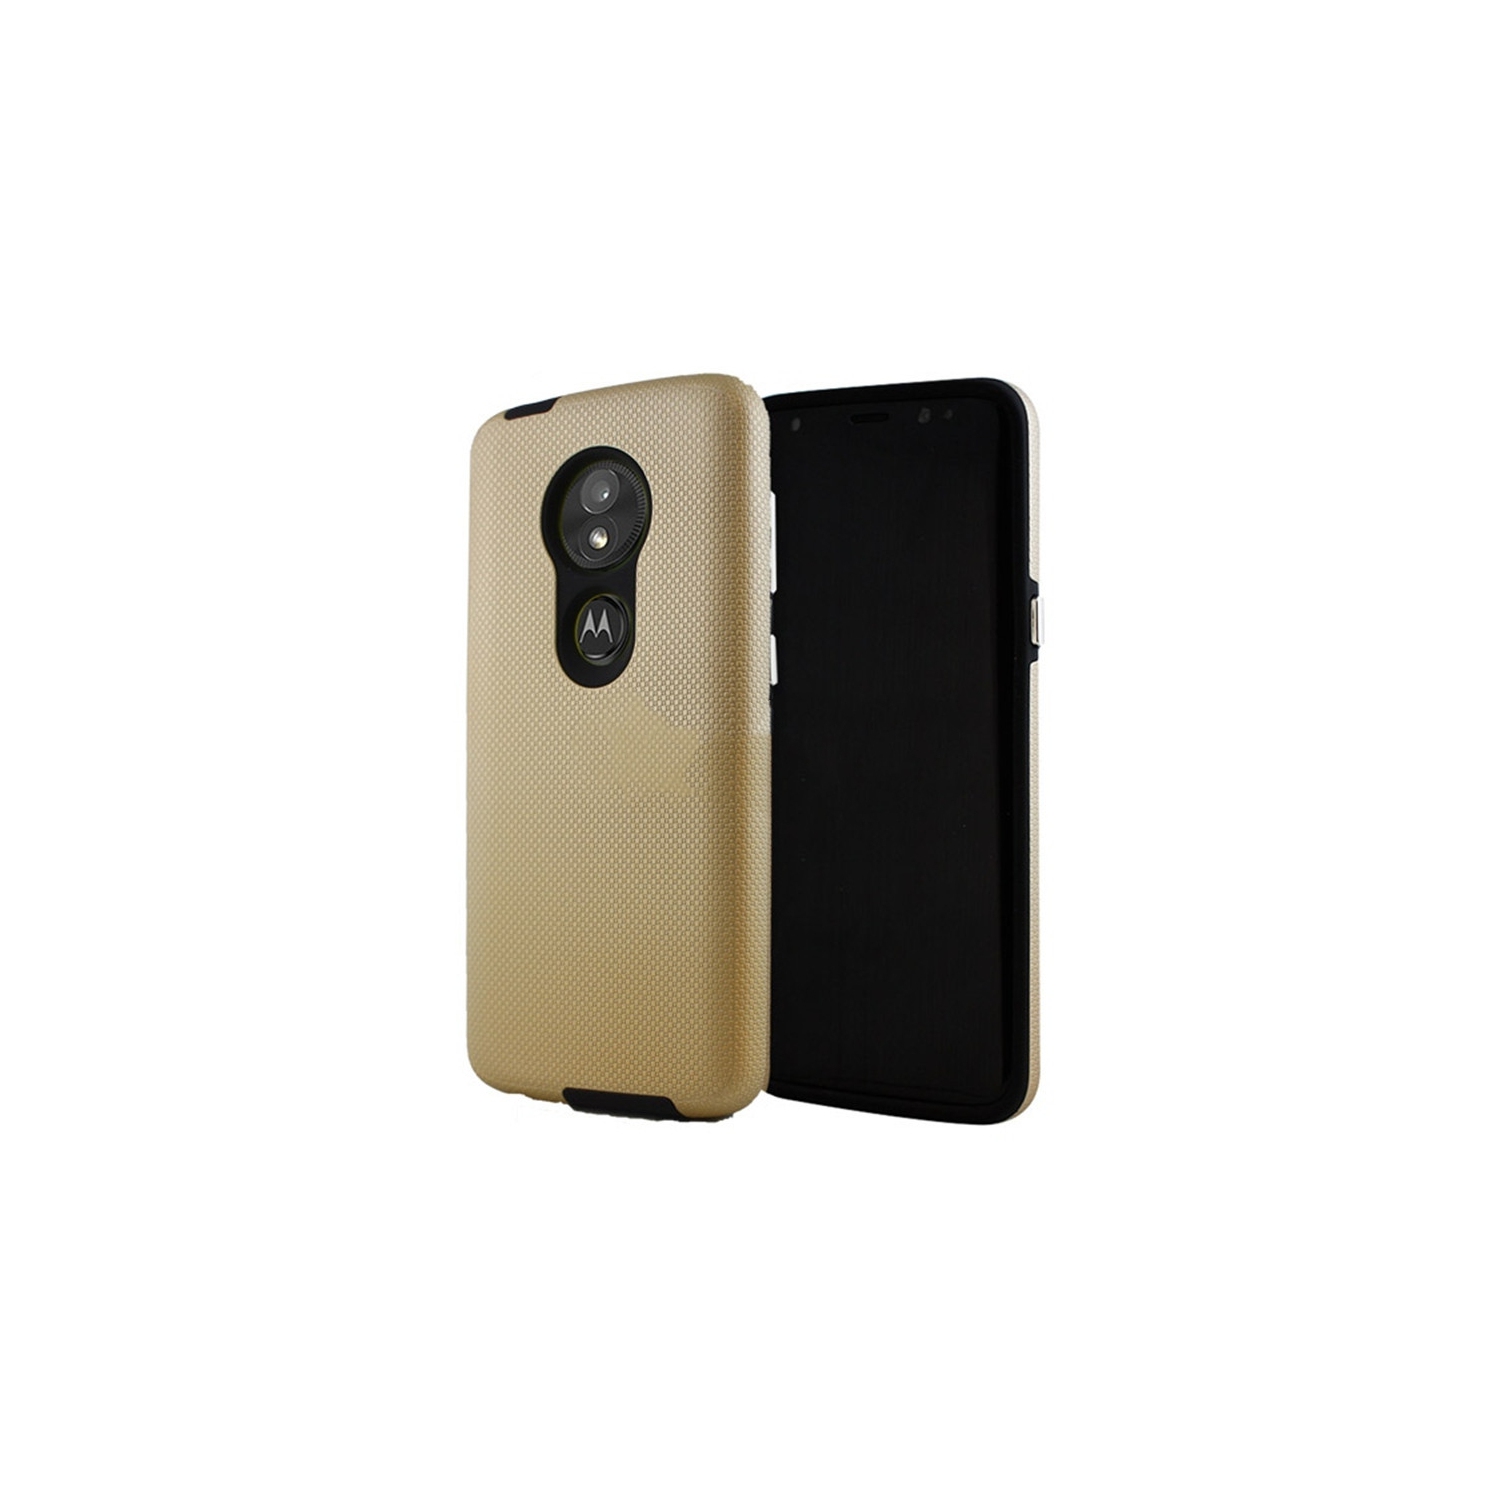 【CSmart】 Slim Fitted Hybrid Hard PC Shell Shockproof Scratch Resistant Case Cover for Motorola Moto G6 Play, Gold